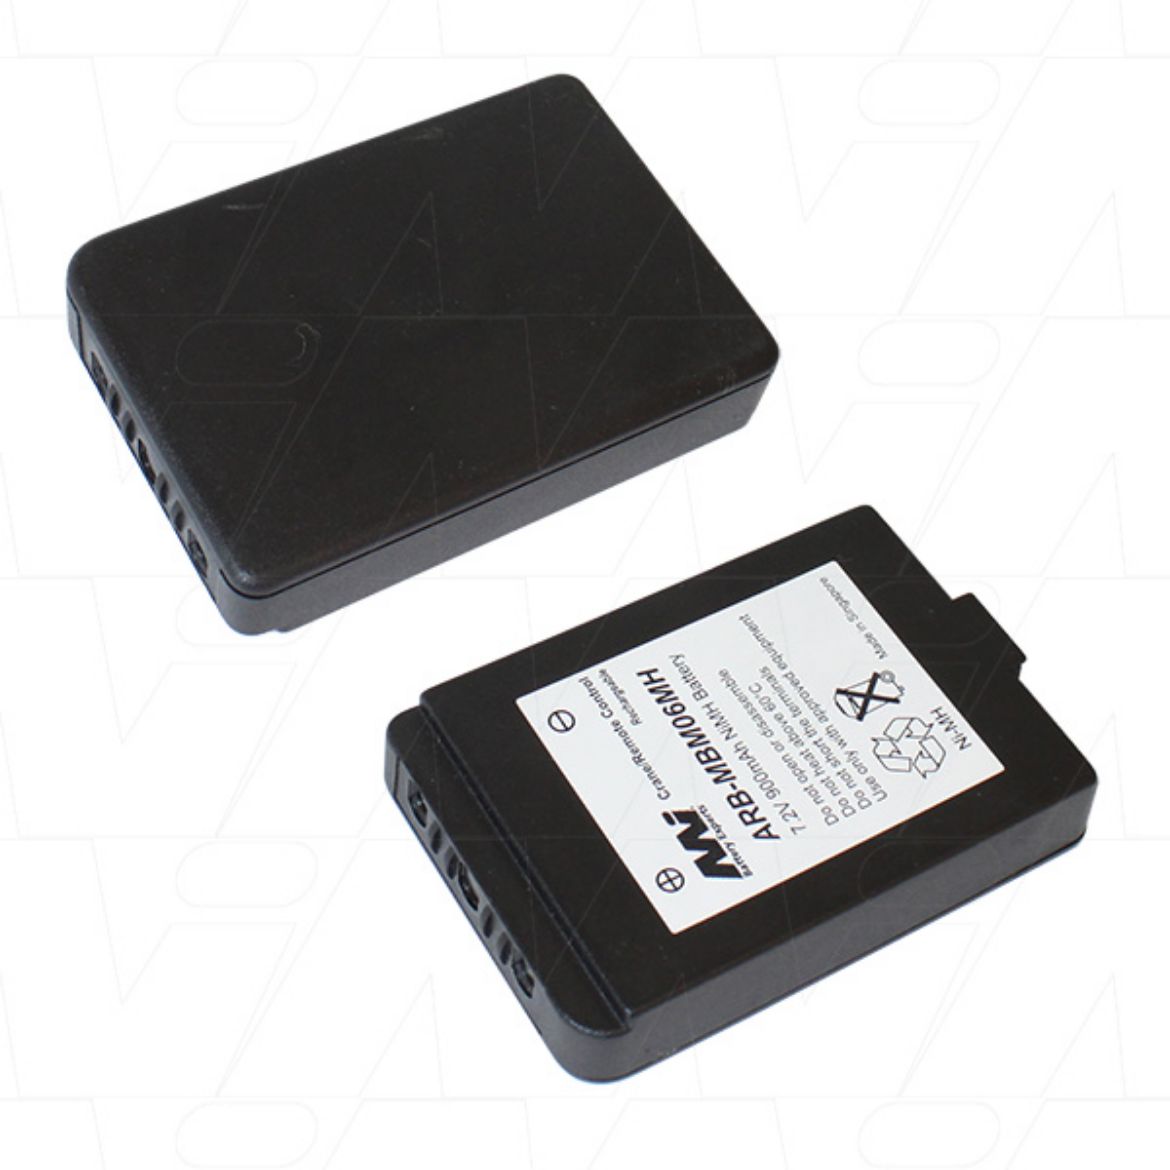 Picture of ARB-MBM06MH CRANE REMOTE BATTERY 7.2V 900MAH 6.5Wh NiMH